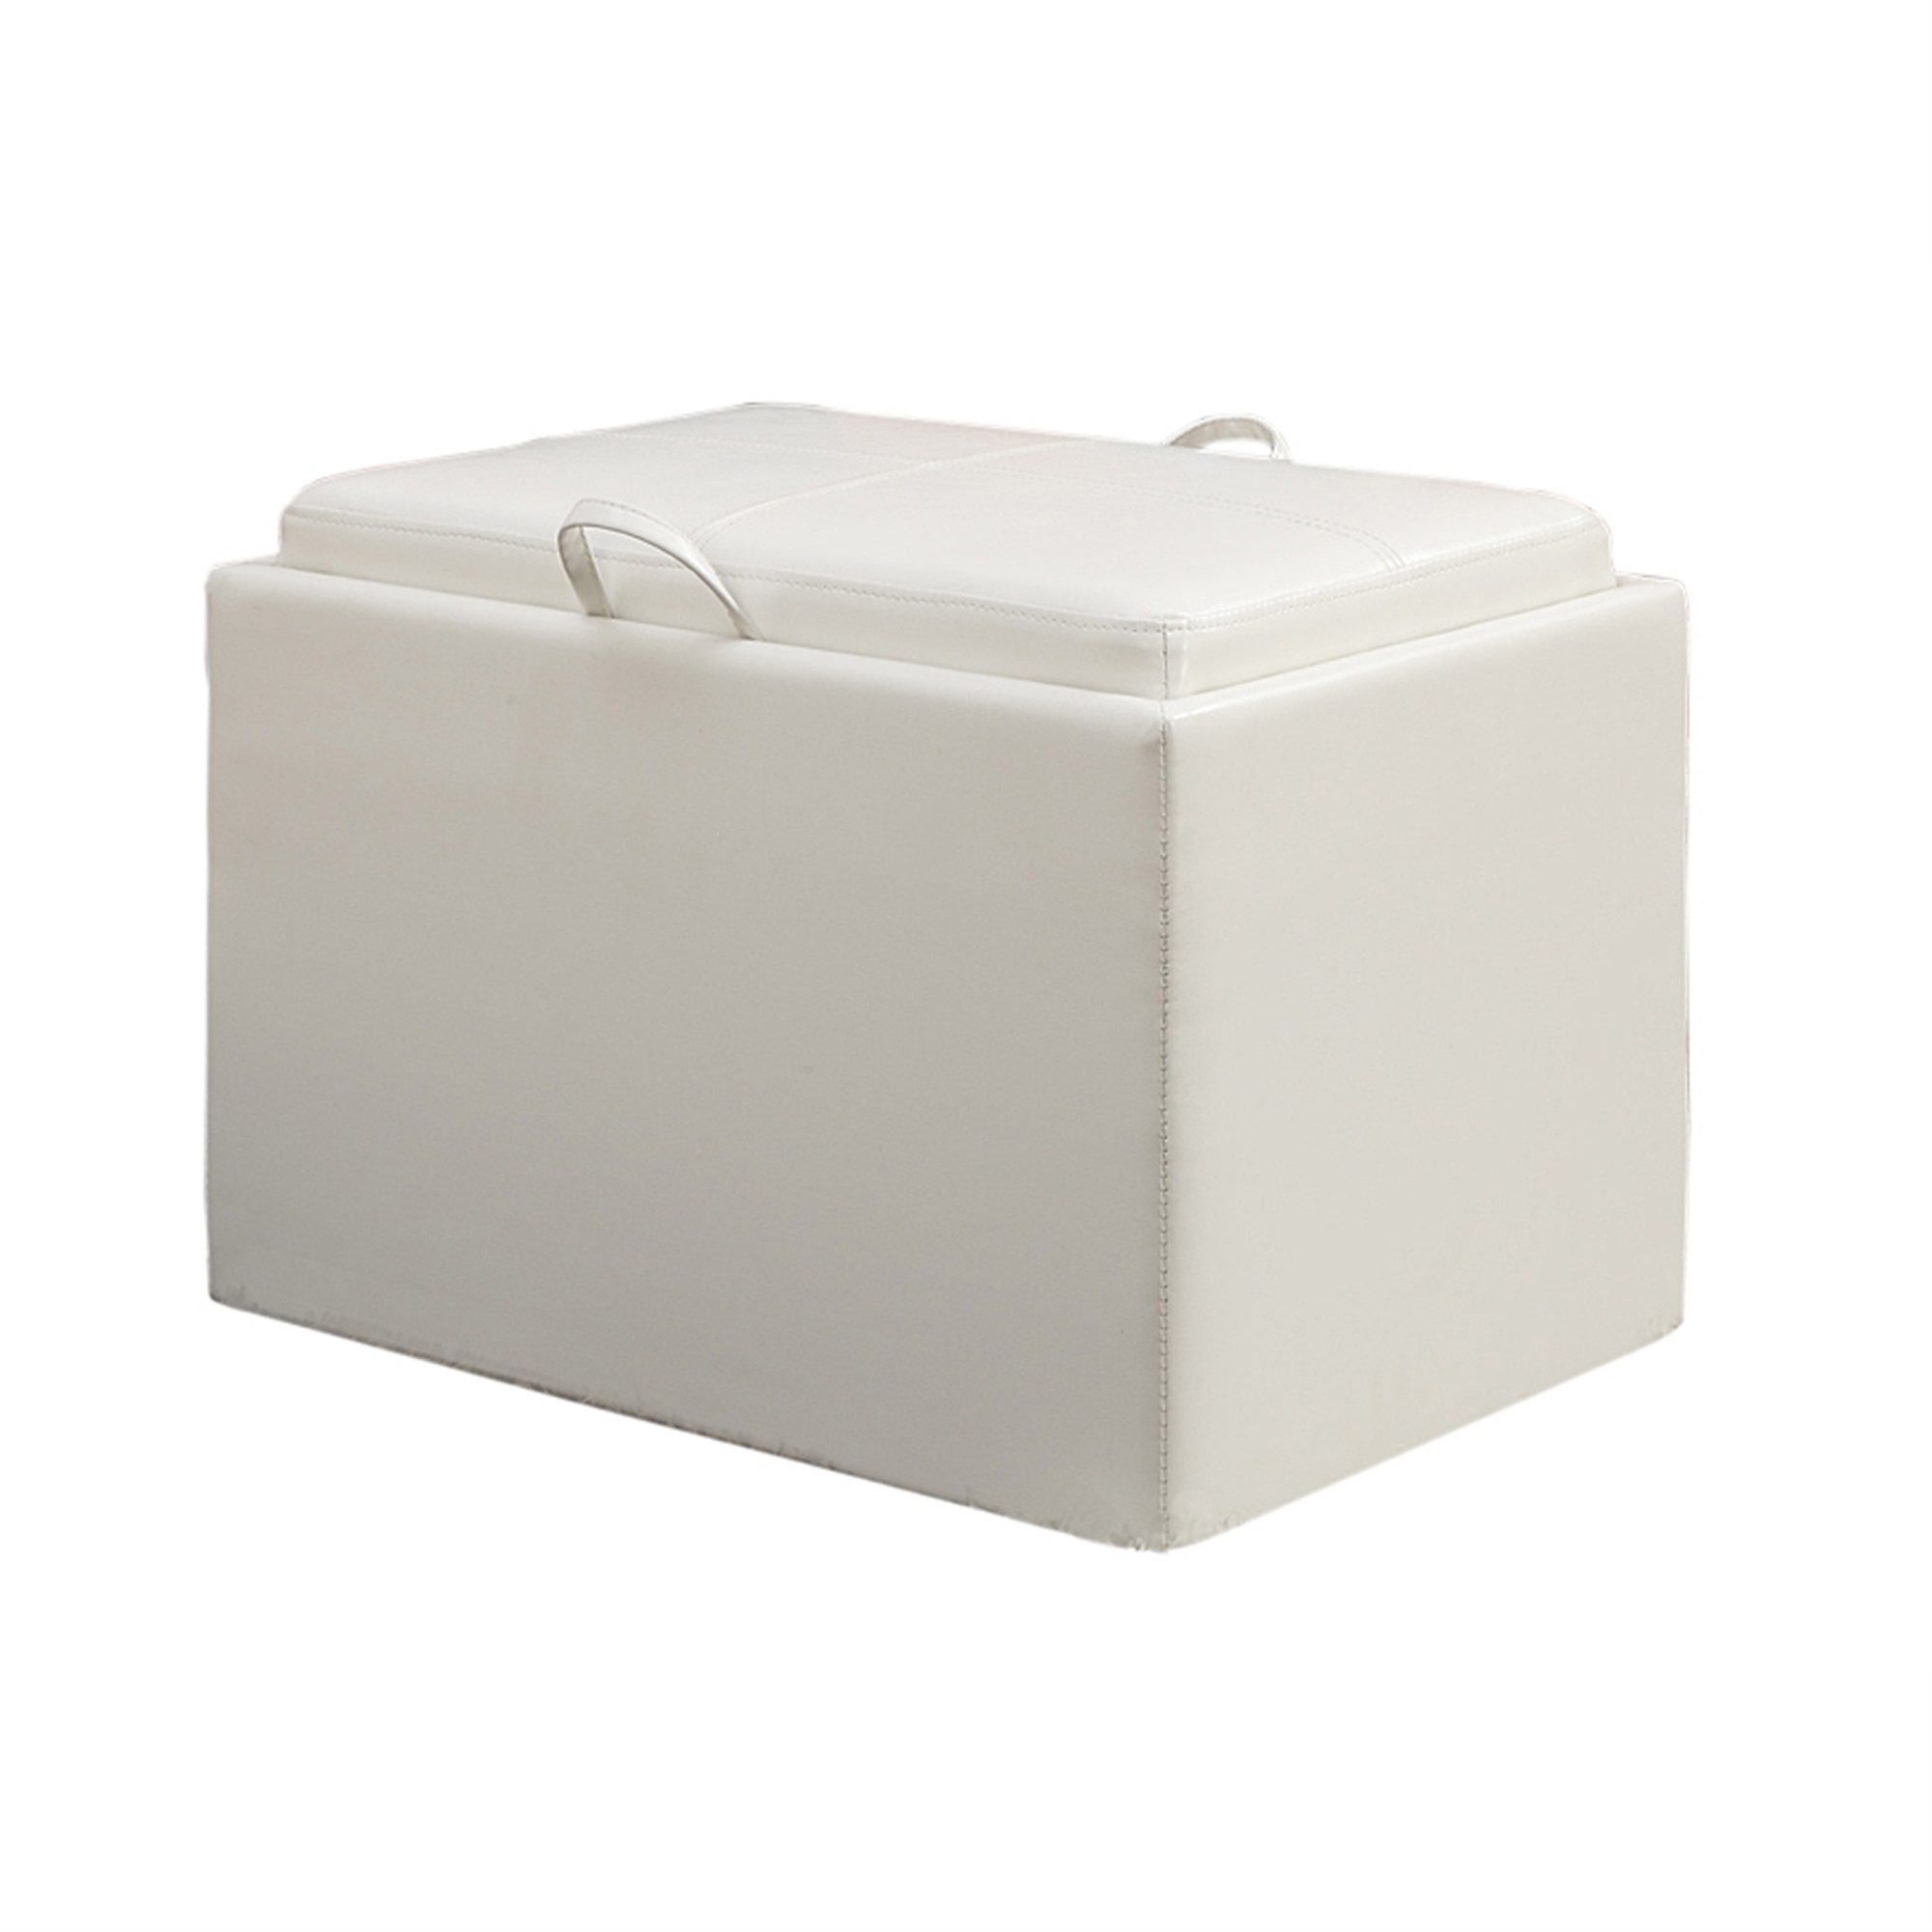 Convenience Concepts Designs4Comfort Accent Storage Ottoman with Reversible Tray, Ivory Faux Leather - image 4 of 5